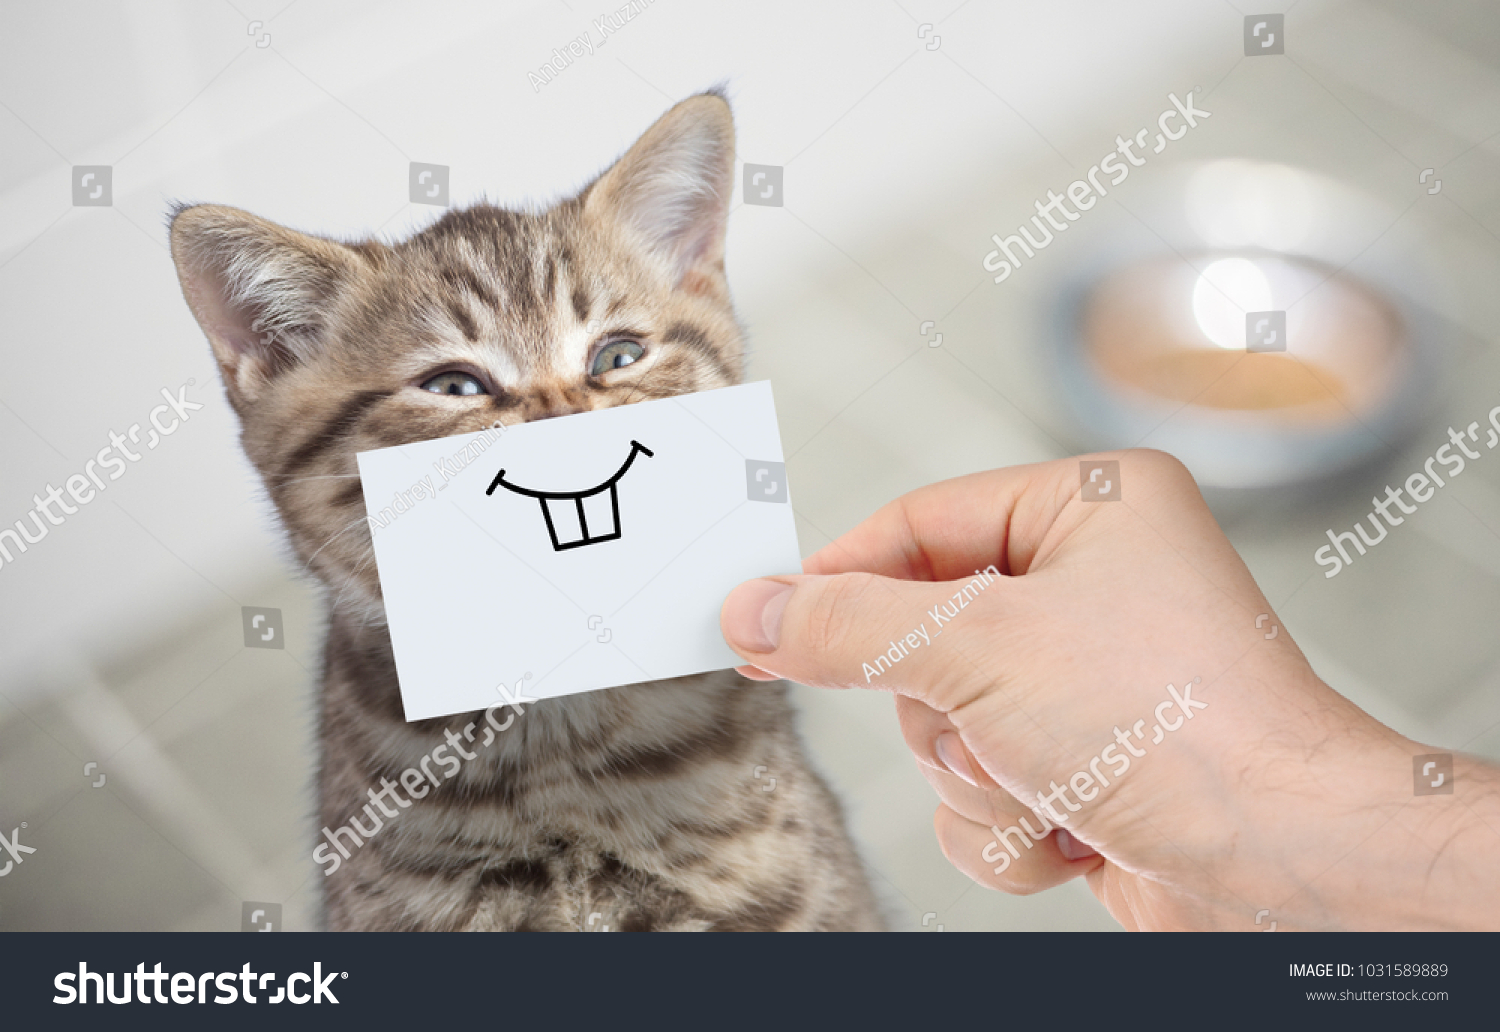 funny cat with smile on cardboard sitting near food #1031589889